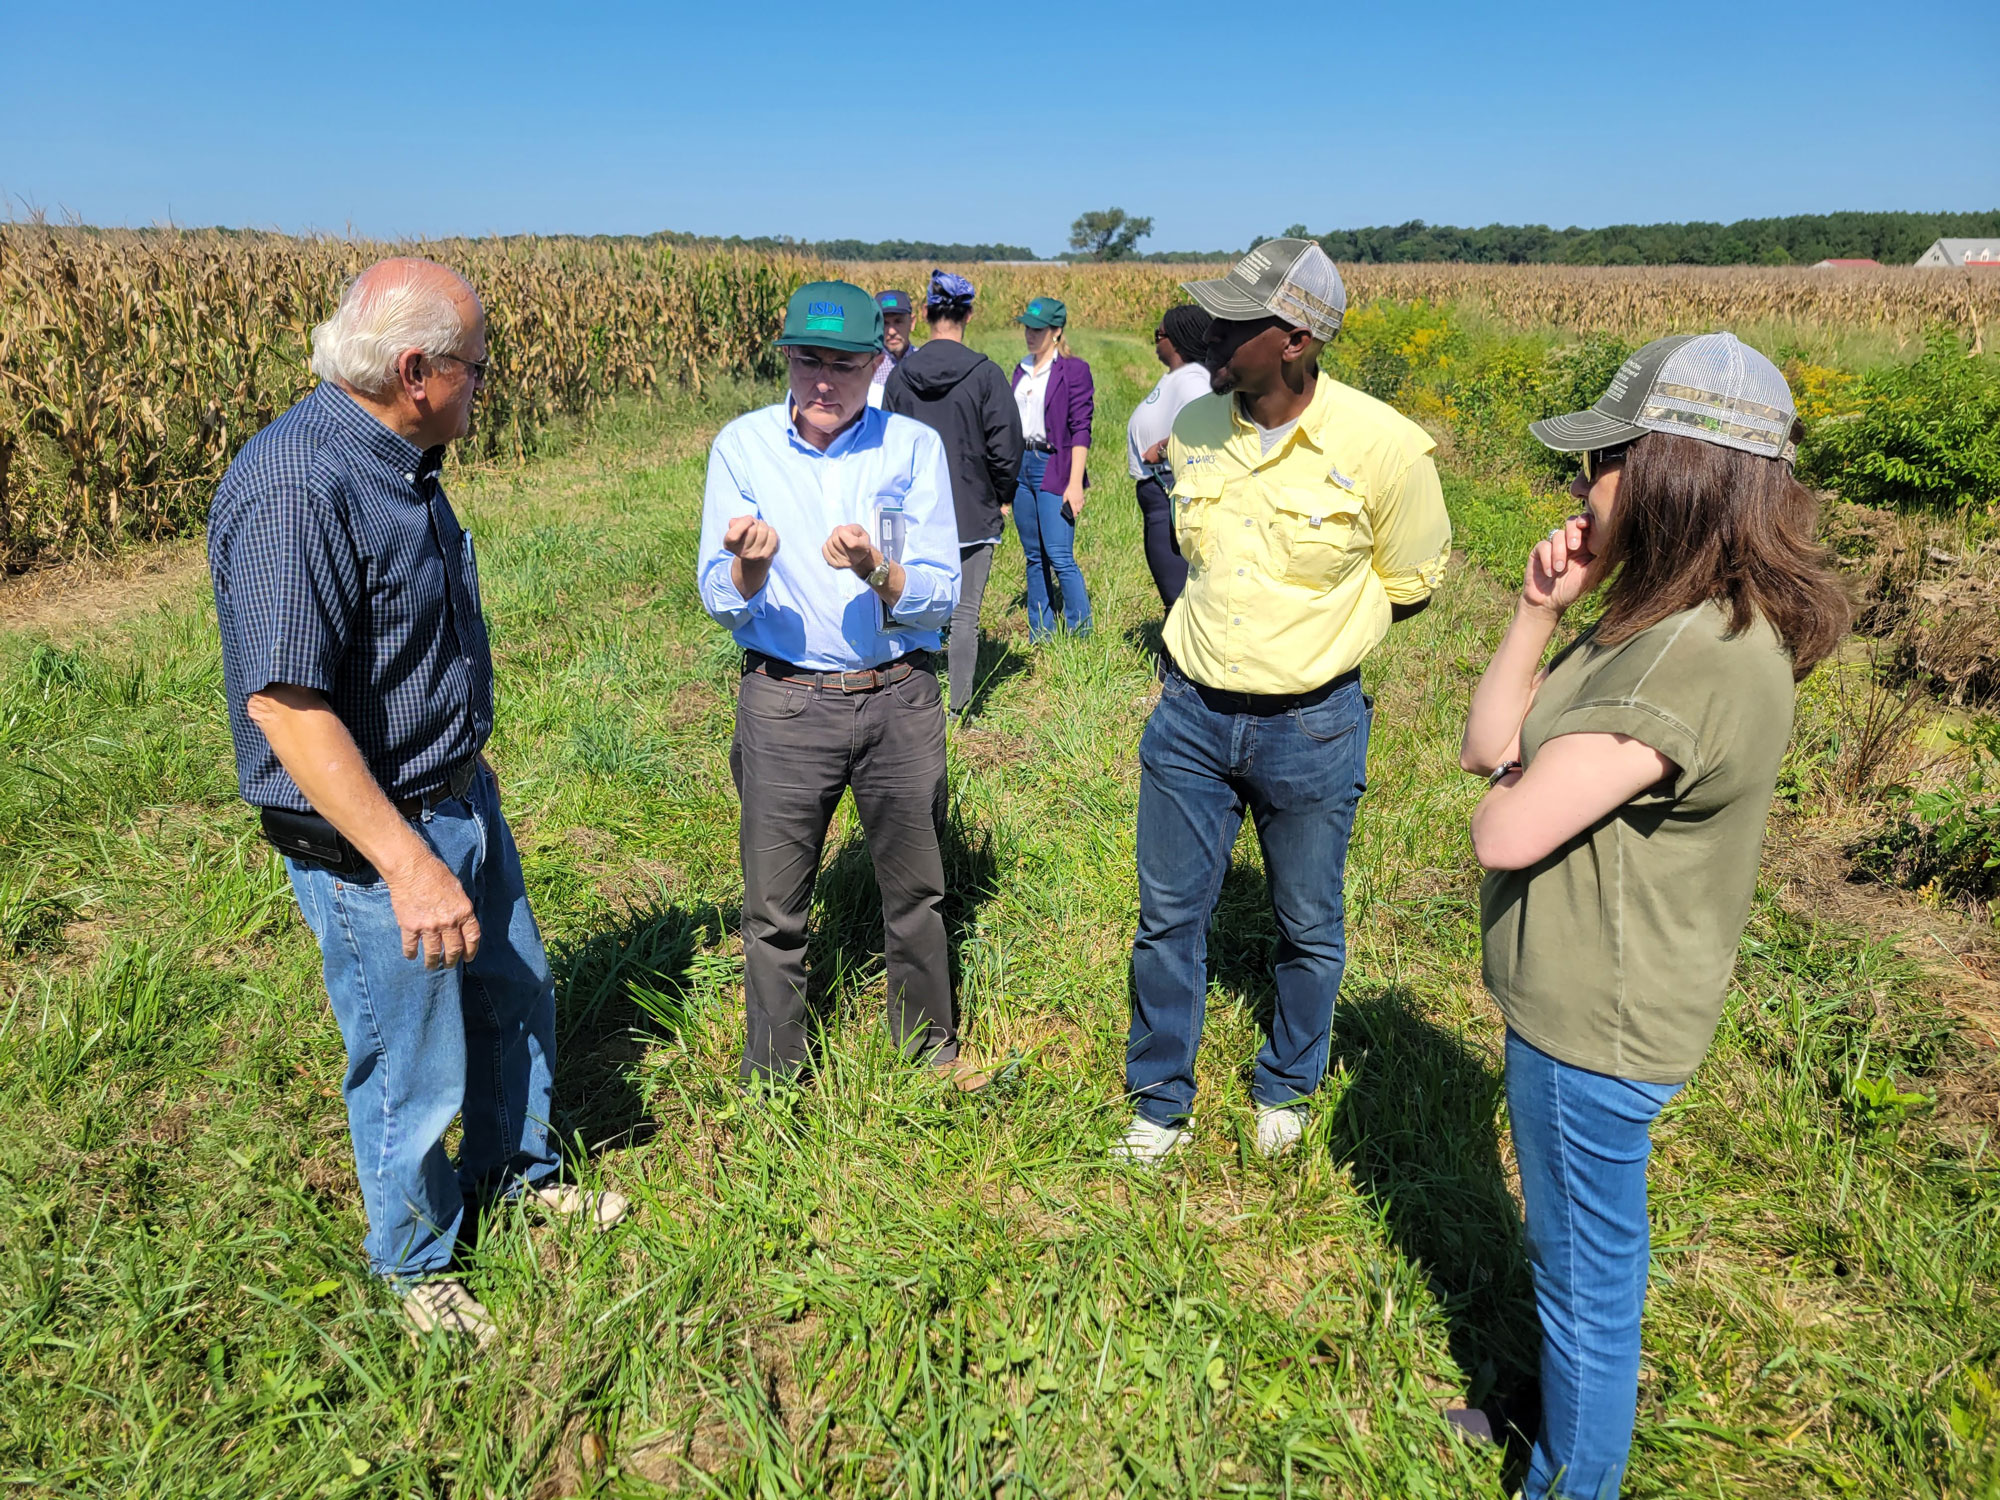 People standing in a half circle in a wheat field on Bobby Hutchison’s farm chatting about the Hutchison family’s work in conservatory farming